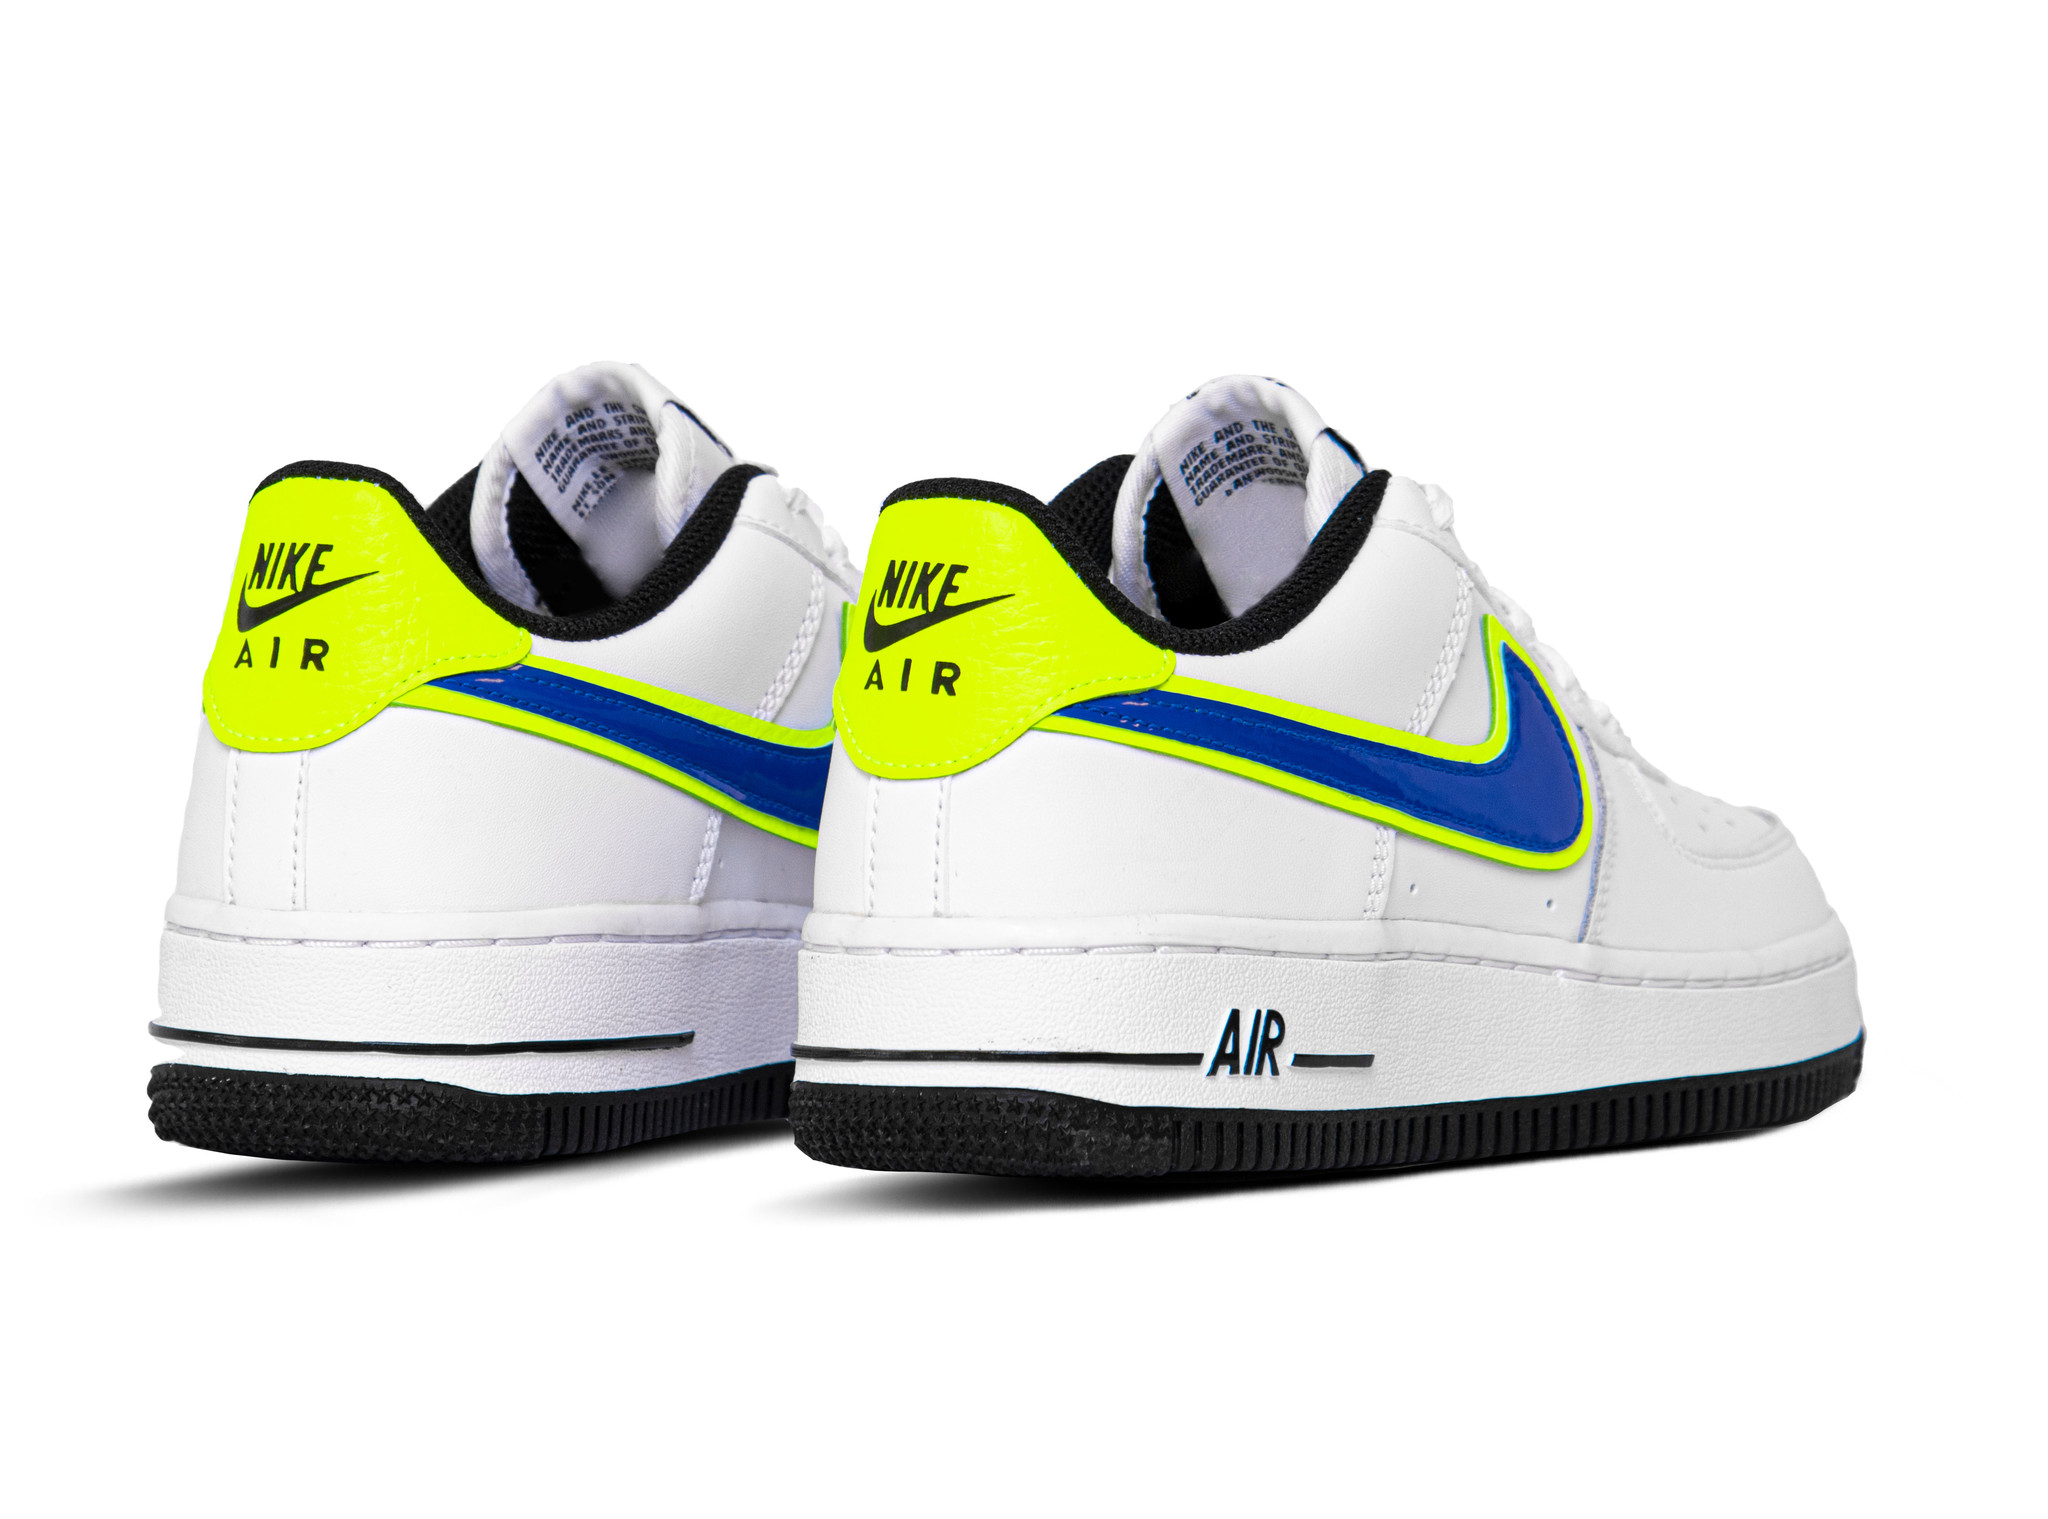 white and blue airforces